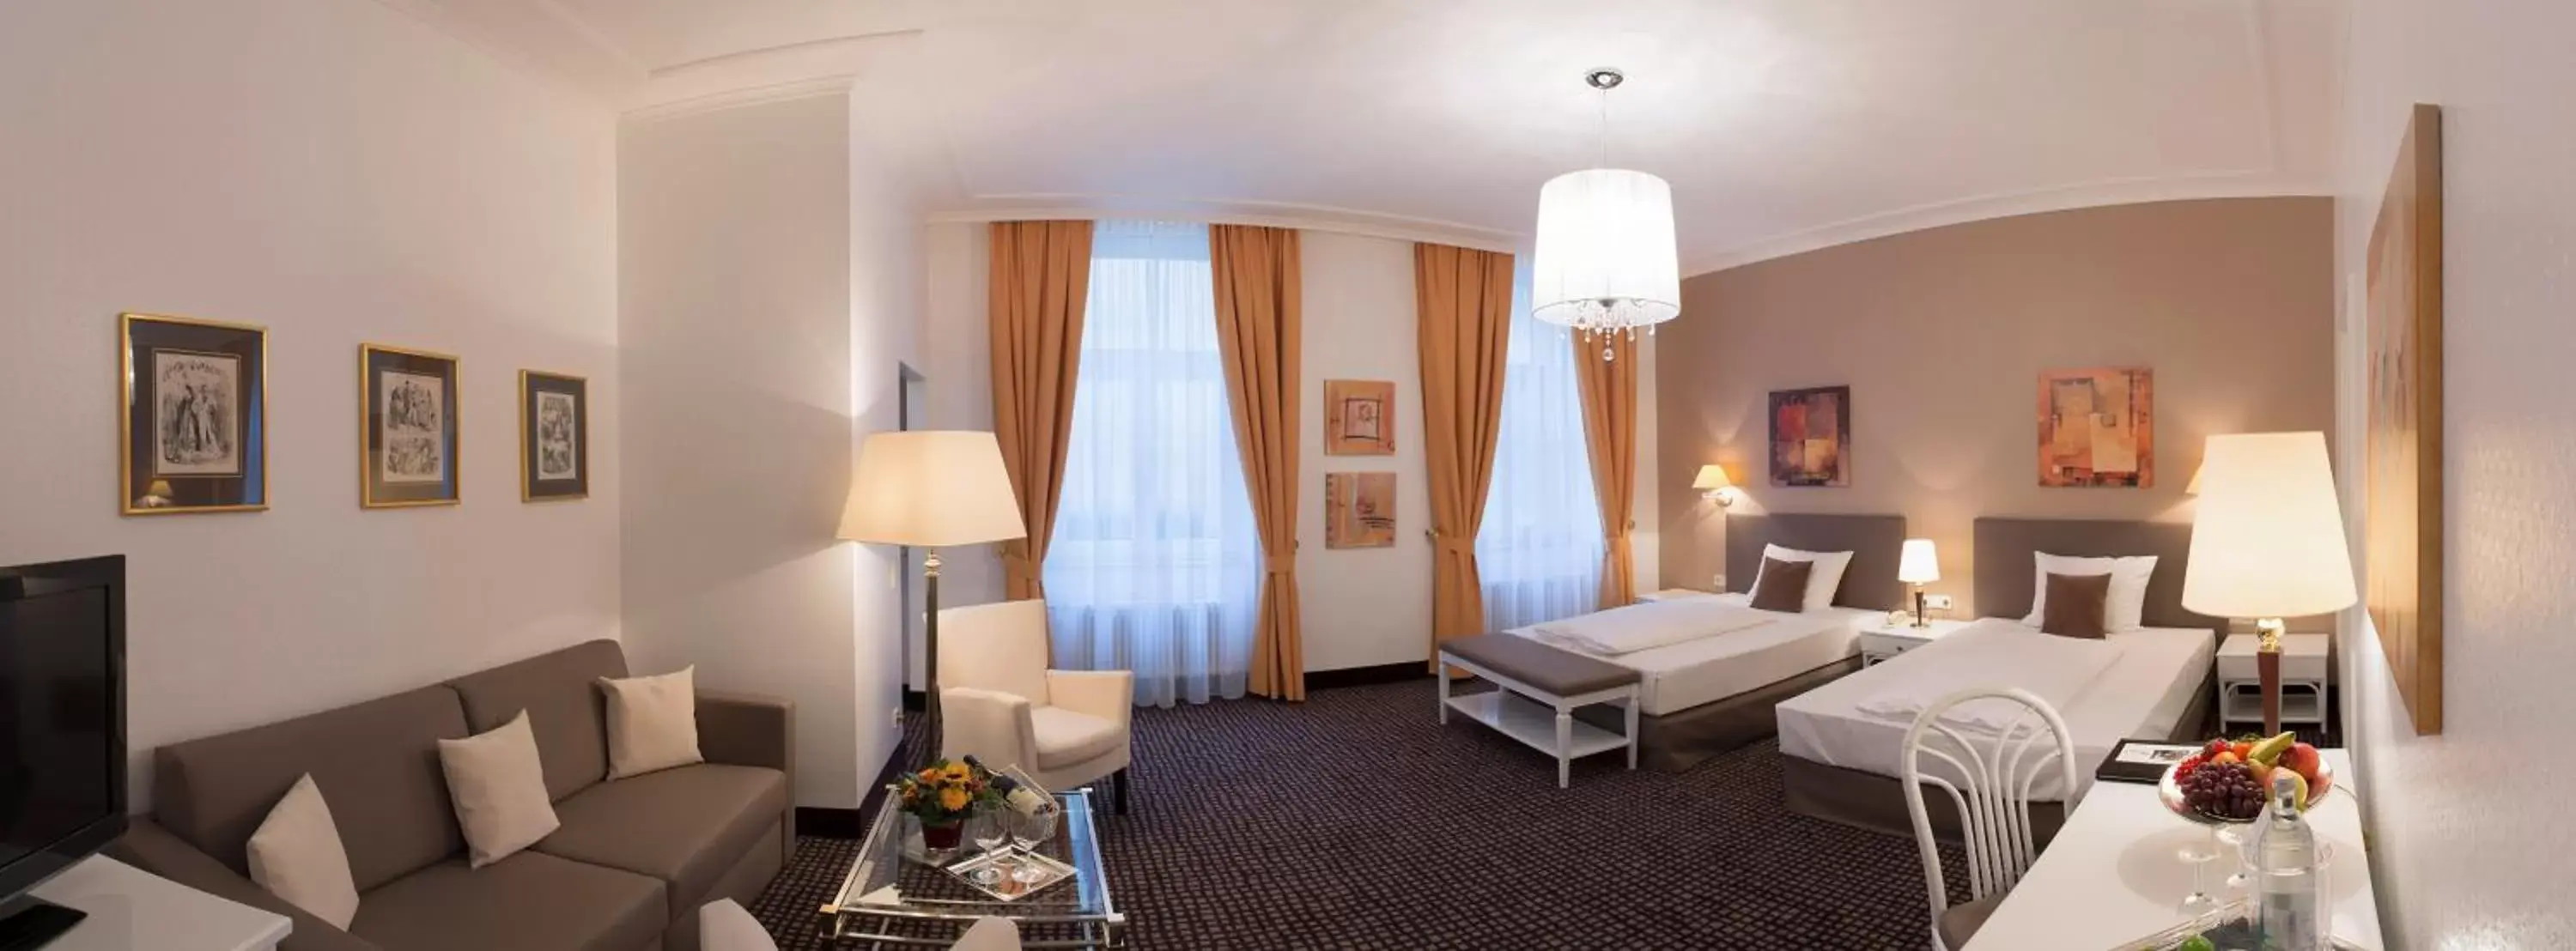 Family Room (2 Adults + 2 Children) in Hotel am Sophienpark